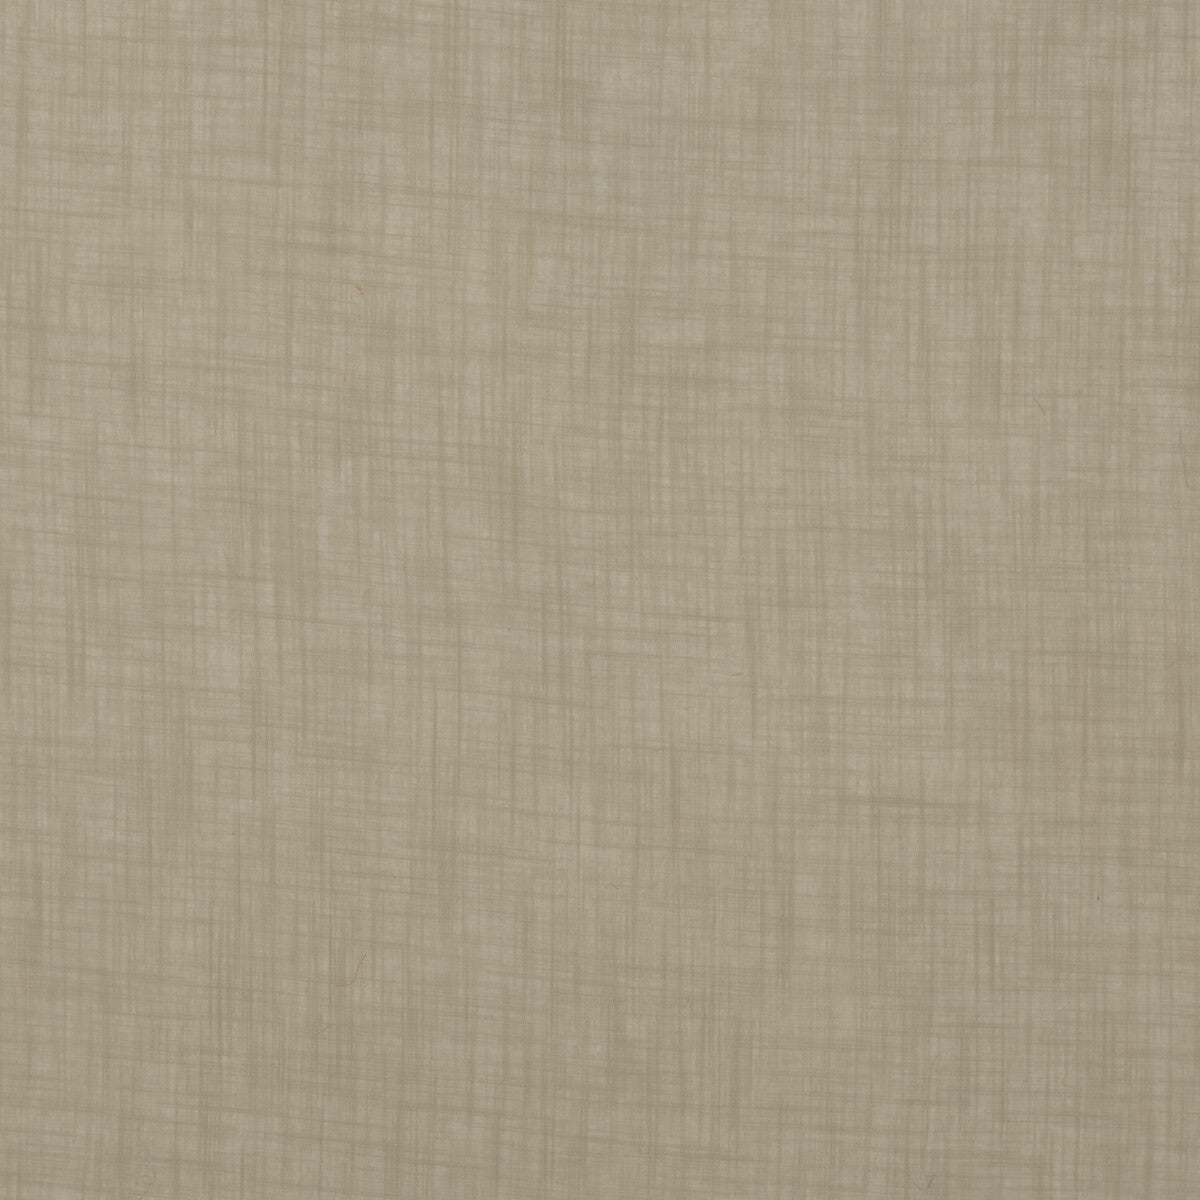 Kelso fabric in cashew color - pattern PV1005.260.0 - by Baker Lifestyle in the Notebooks collection